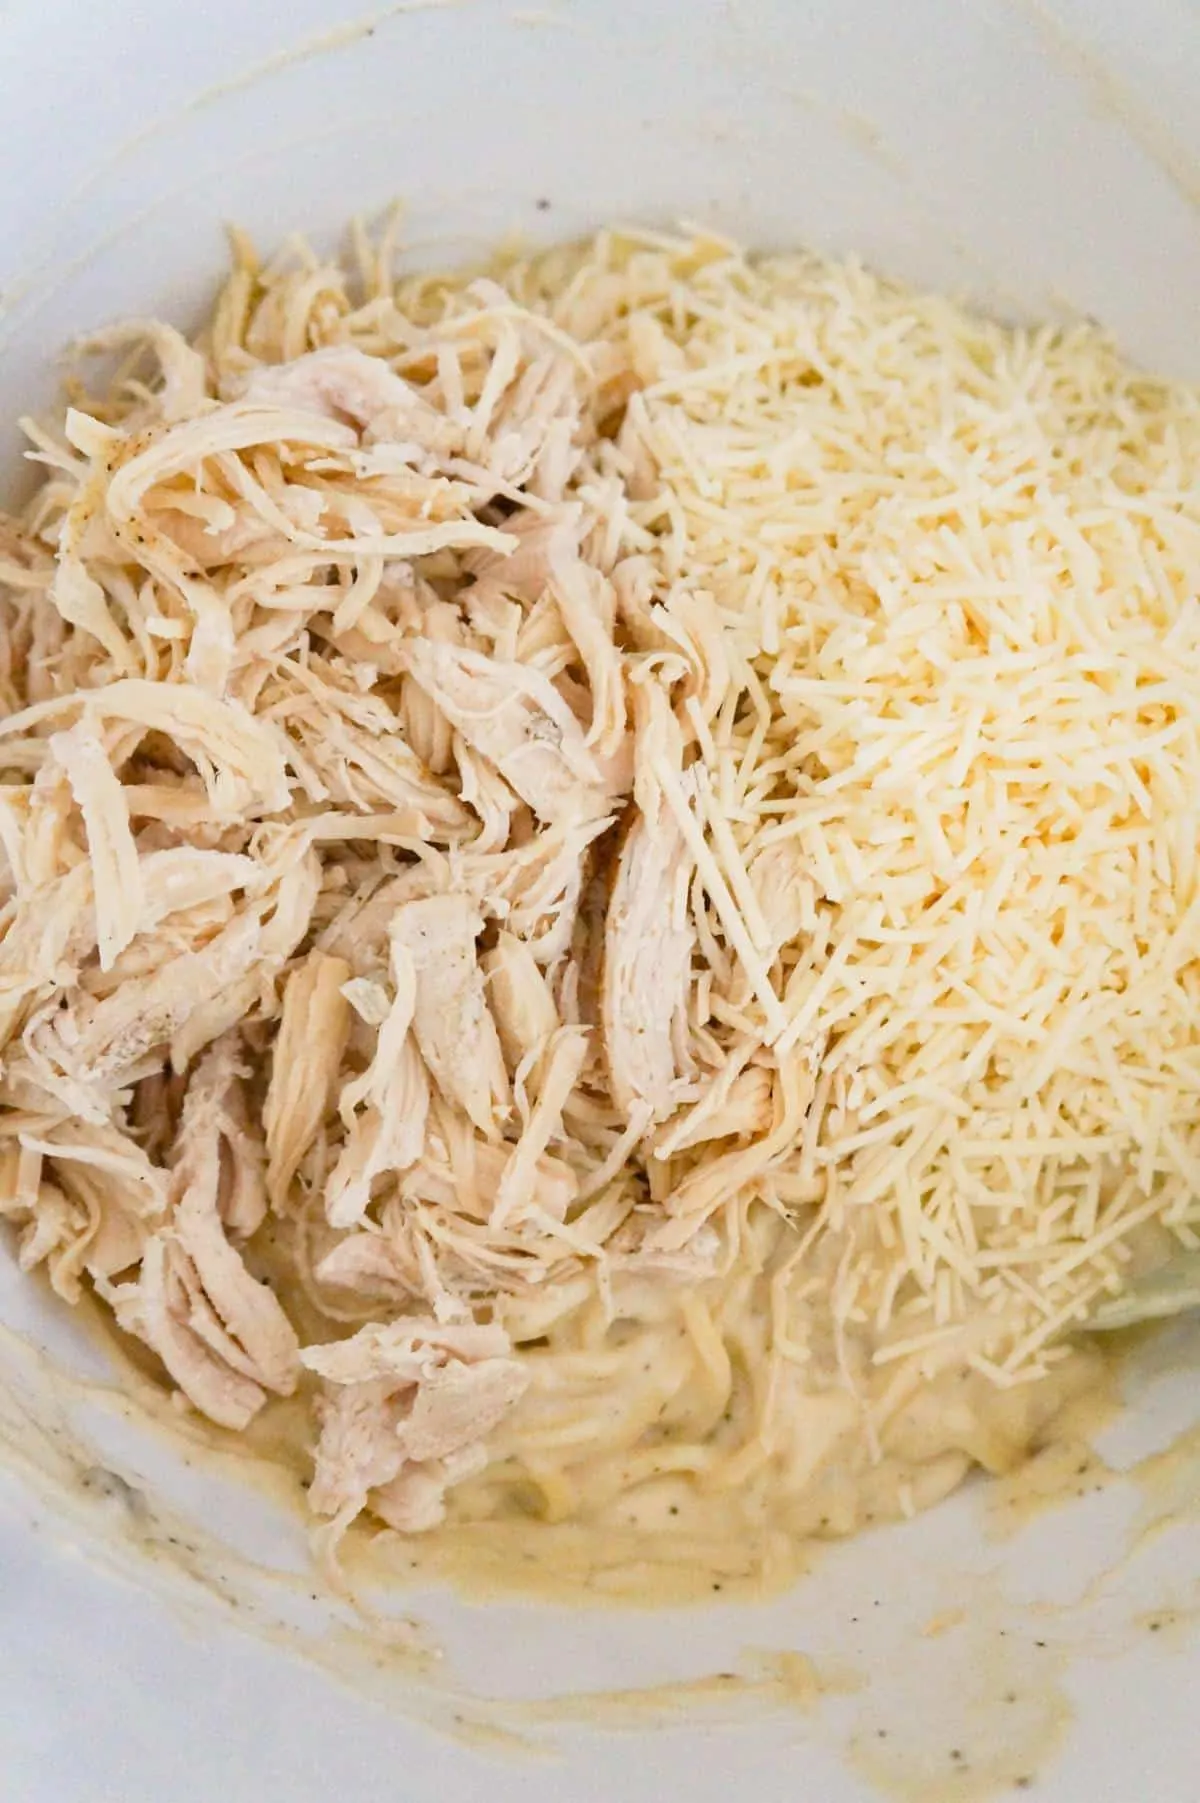 shredded chicken and shredded Parmesan on top of spaghetti in a mixing bowl